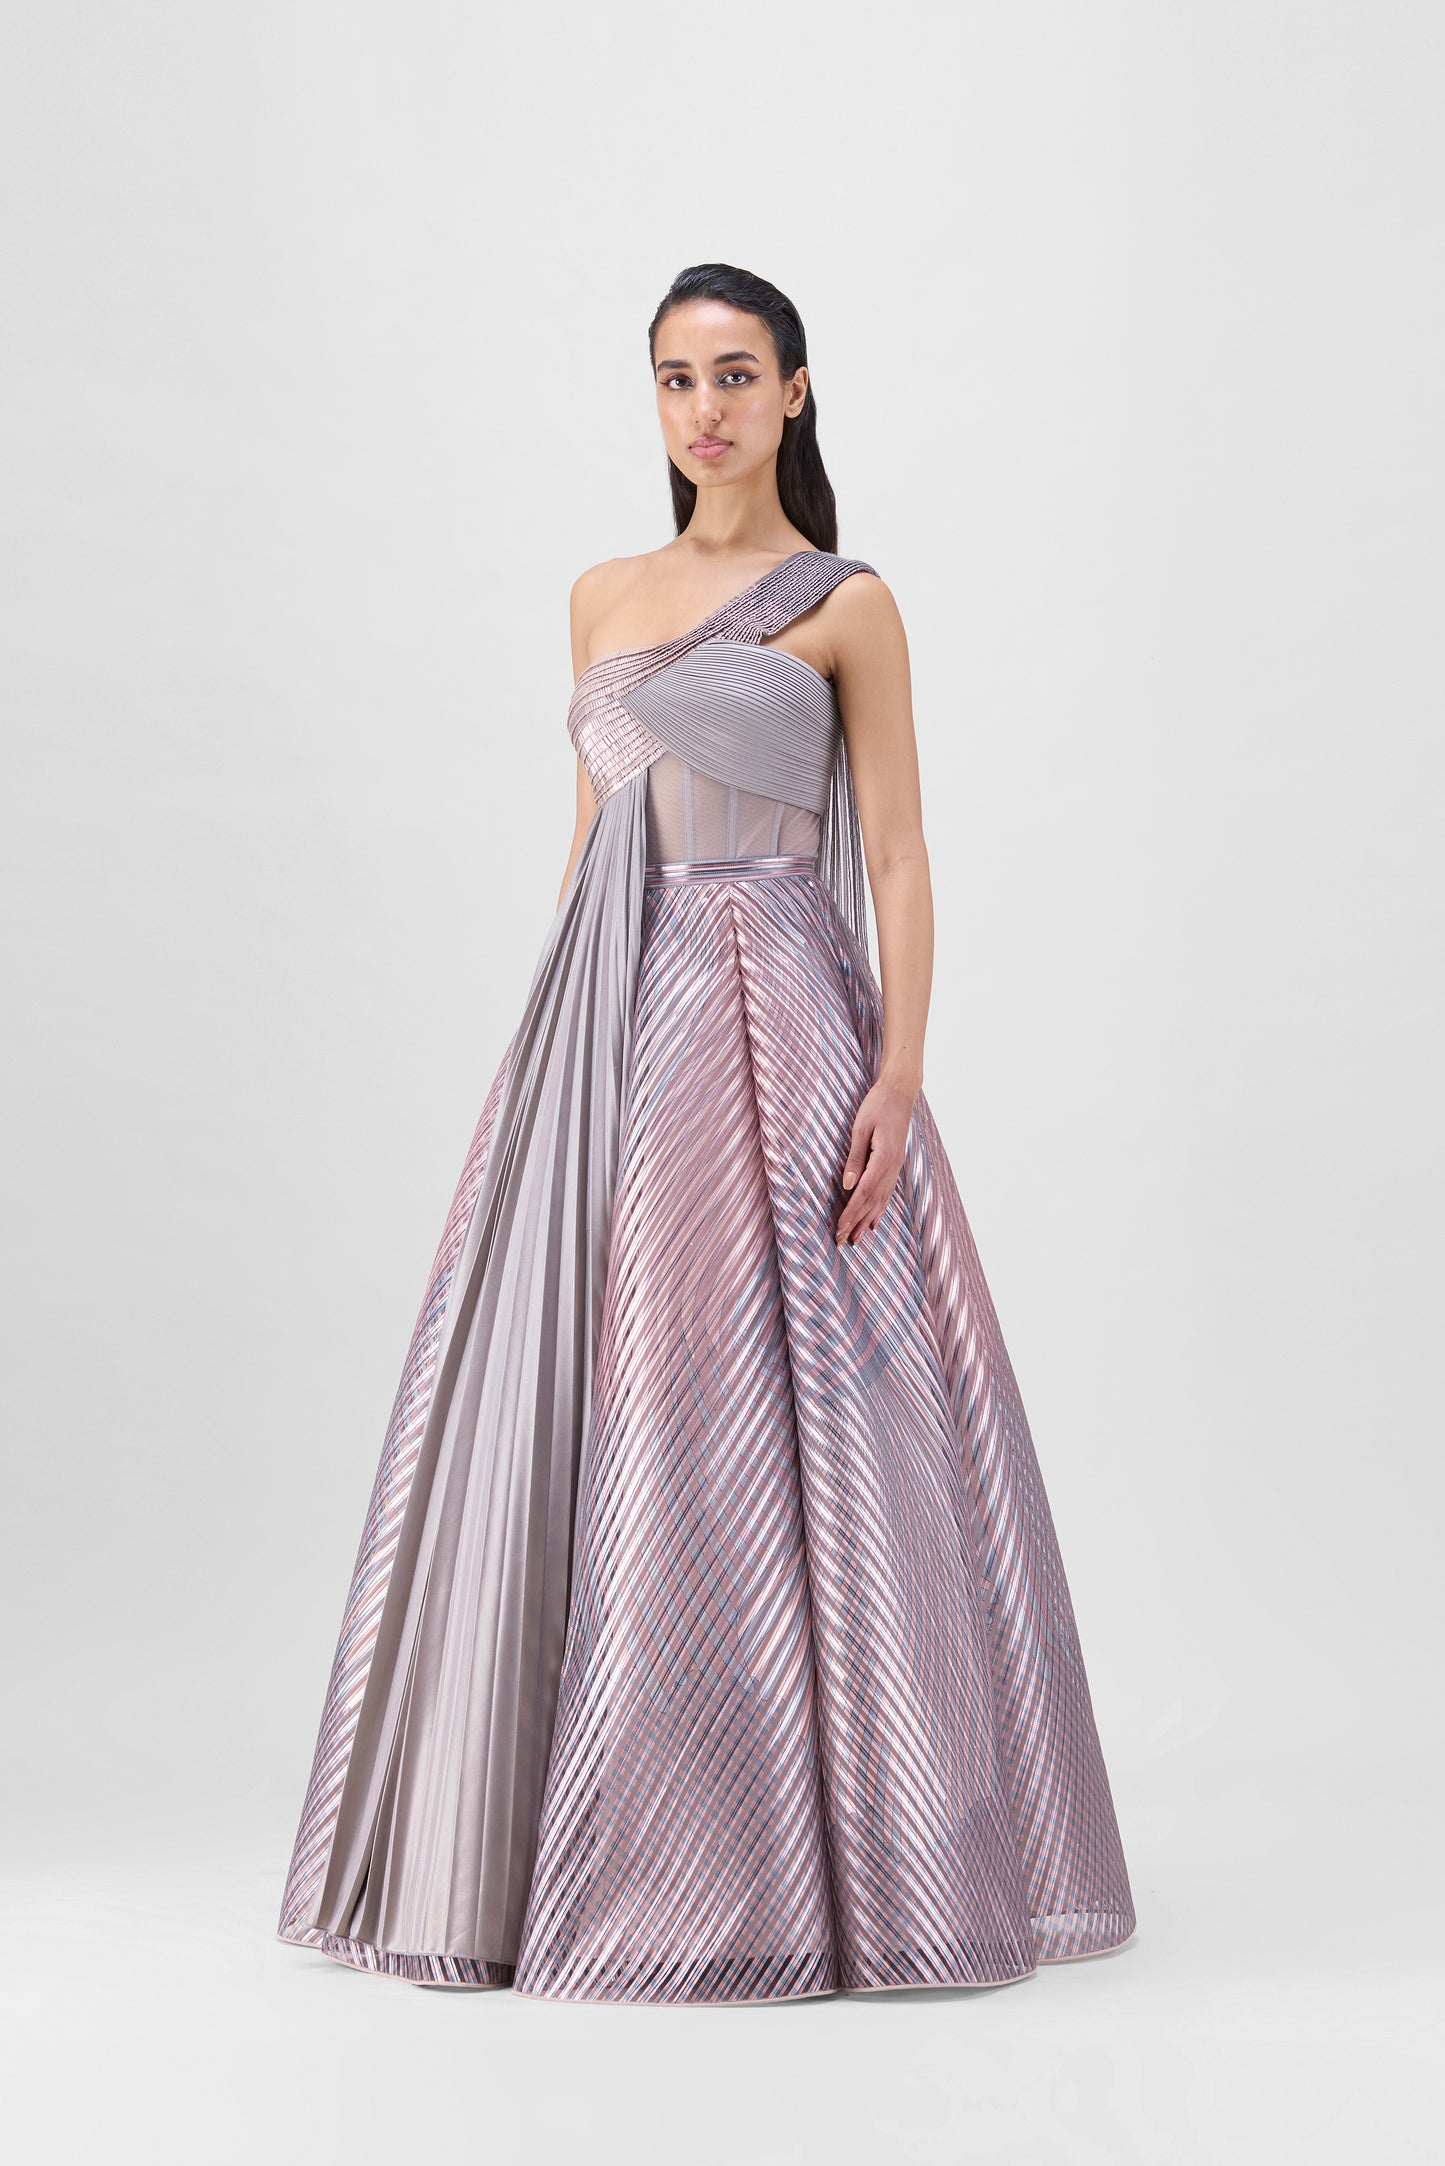 METALLIC FLUTED TULLE PRINTED SKIRT AND TOP WITH TWO DRAPES